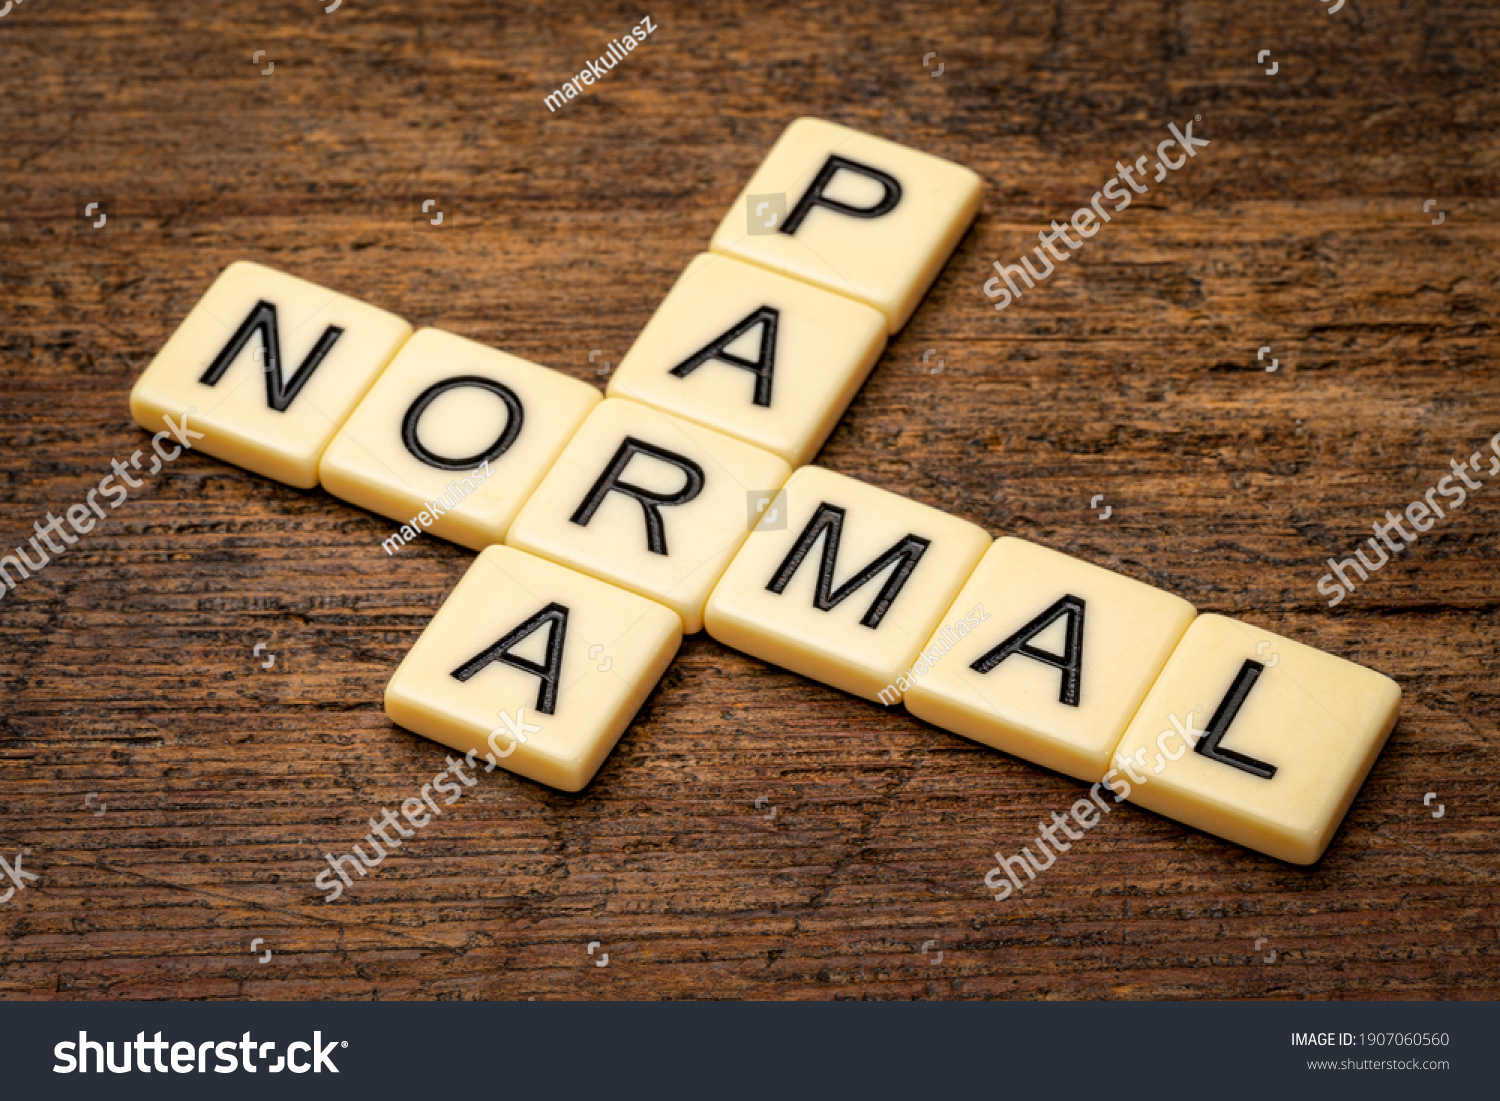 paranormal crossword in ivory letter tiles against rustic weathered wood, supernatural and unexplained phenomena #1907060560